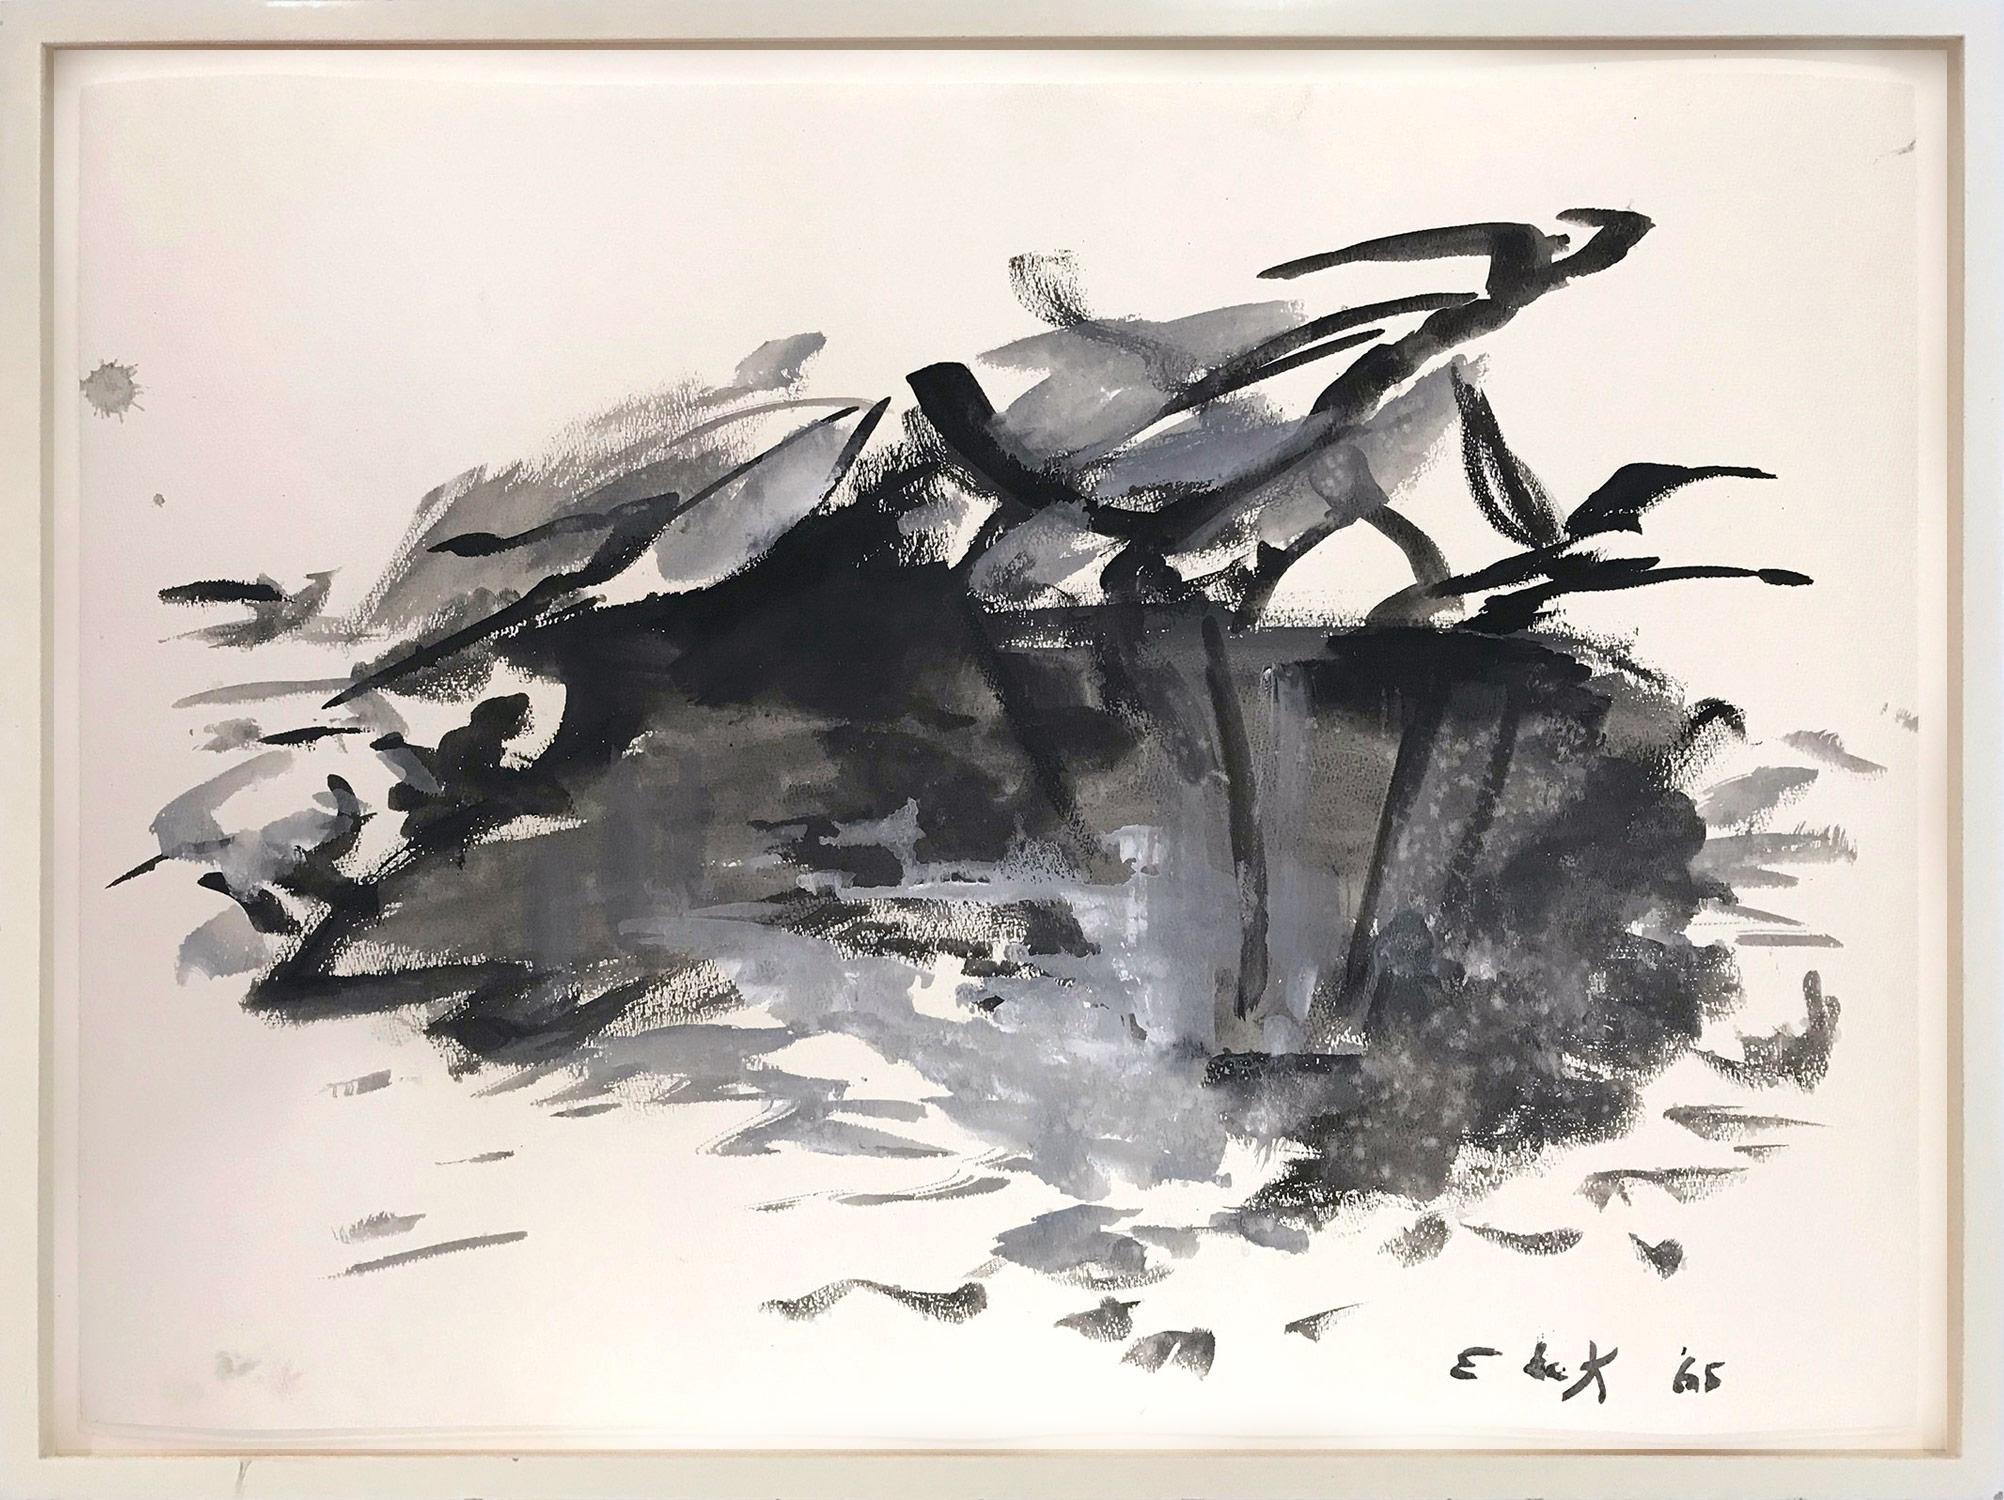 Elaine de Kooning Abstract Drawing - Abstract Landscape Composition